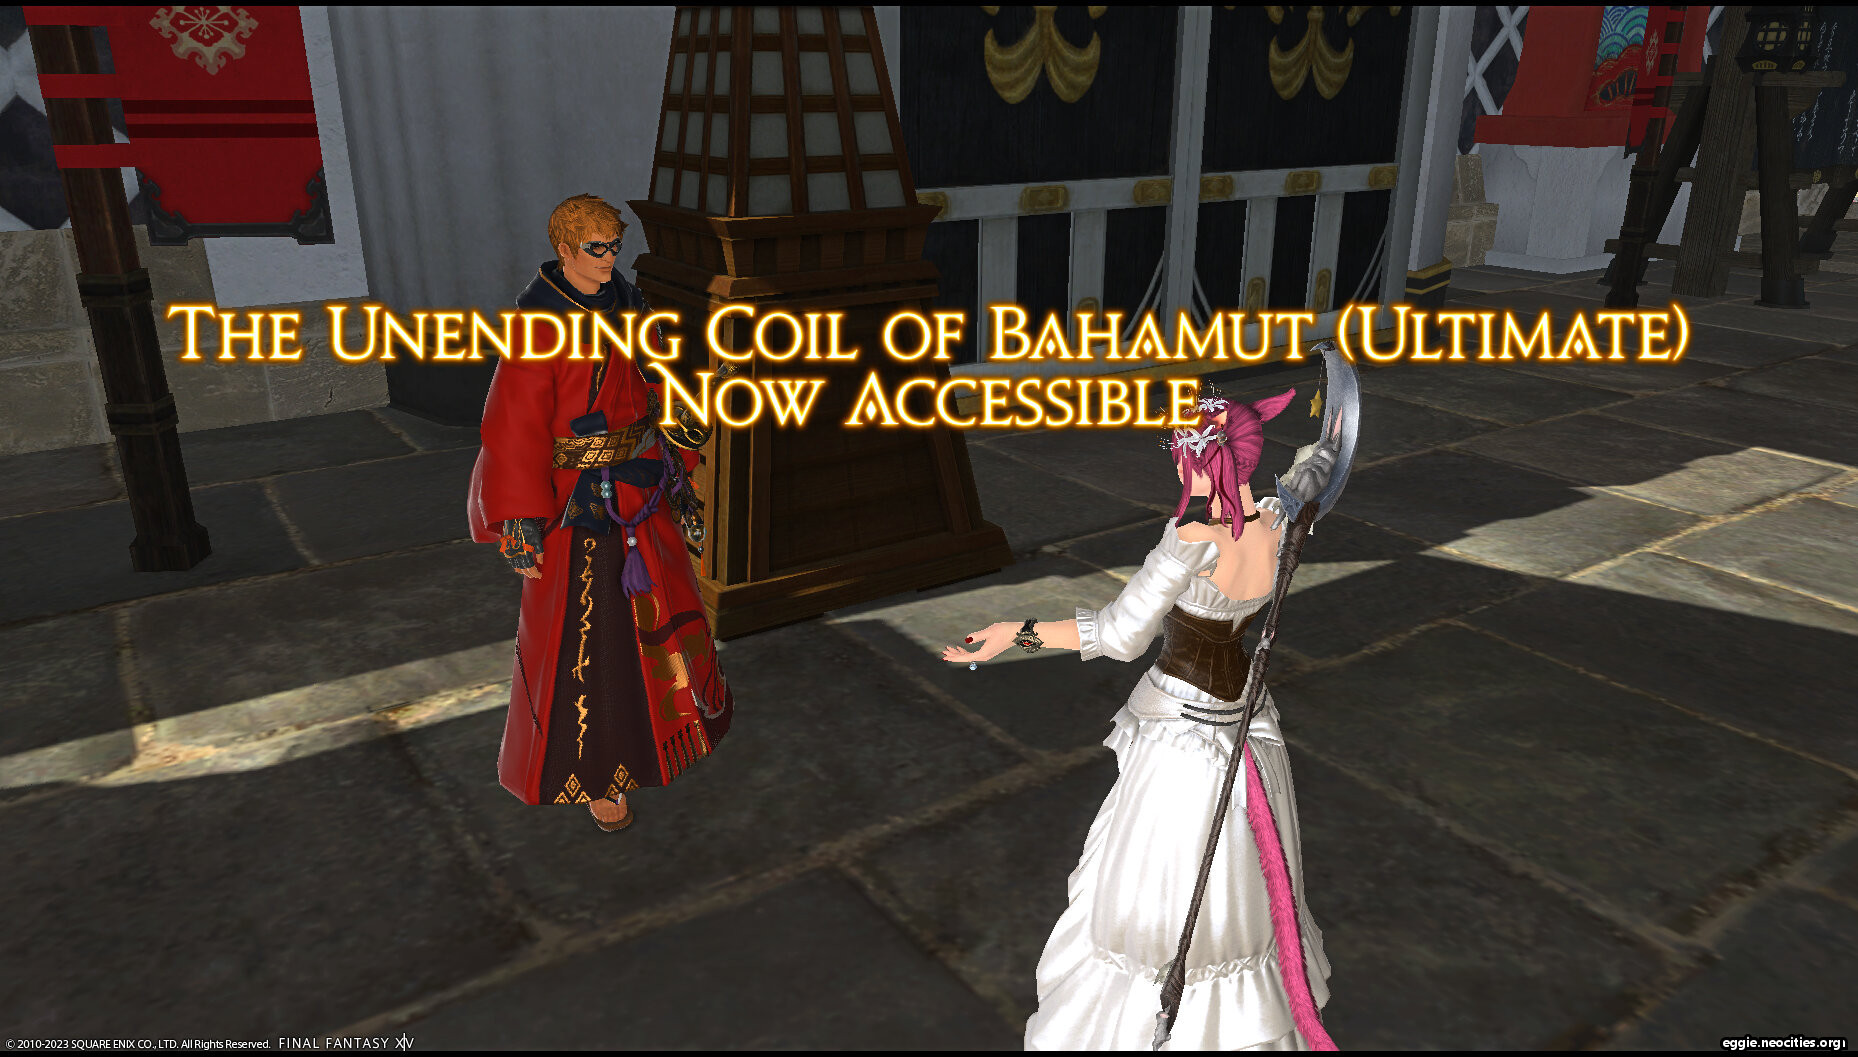 Zel talking to the Wandering Minstrel. There is text on screen that reads The Unending Coil of Bahamut (Ultimate) is now accessible.